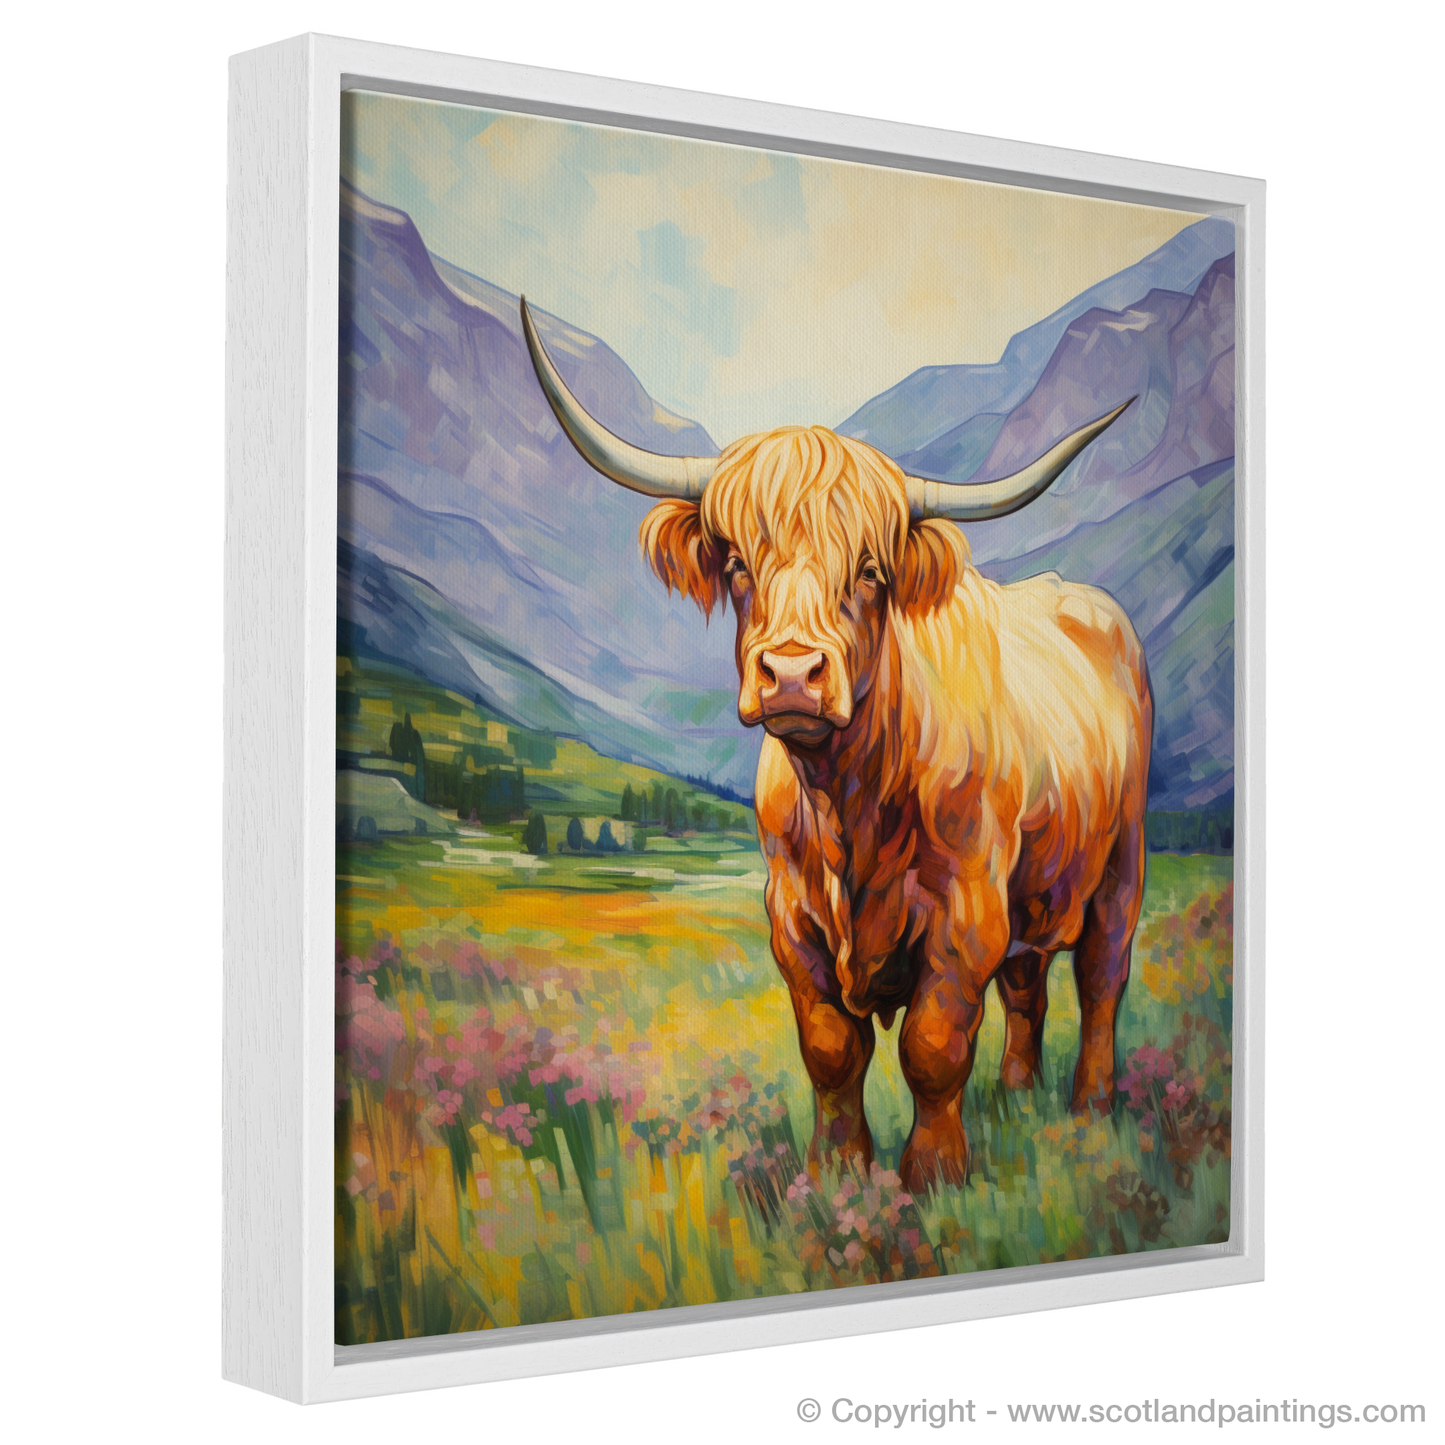 Painting and Art Print of Highland cow in Glencoe during summer entitled "Highland Cow in Summer Glencoe".